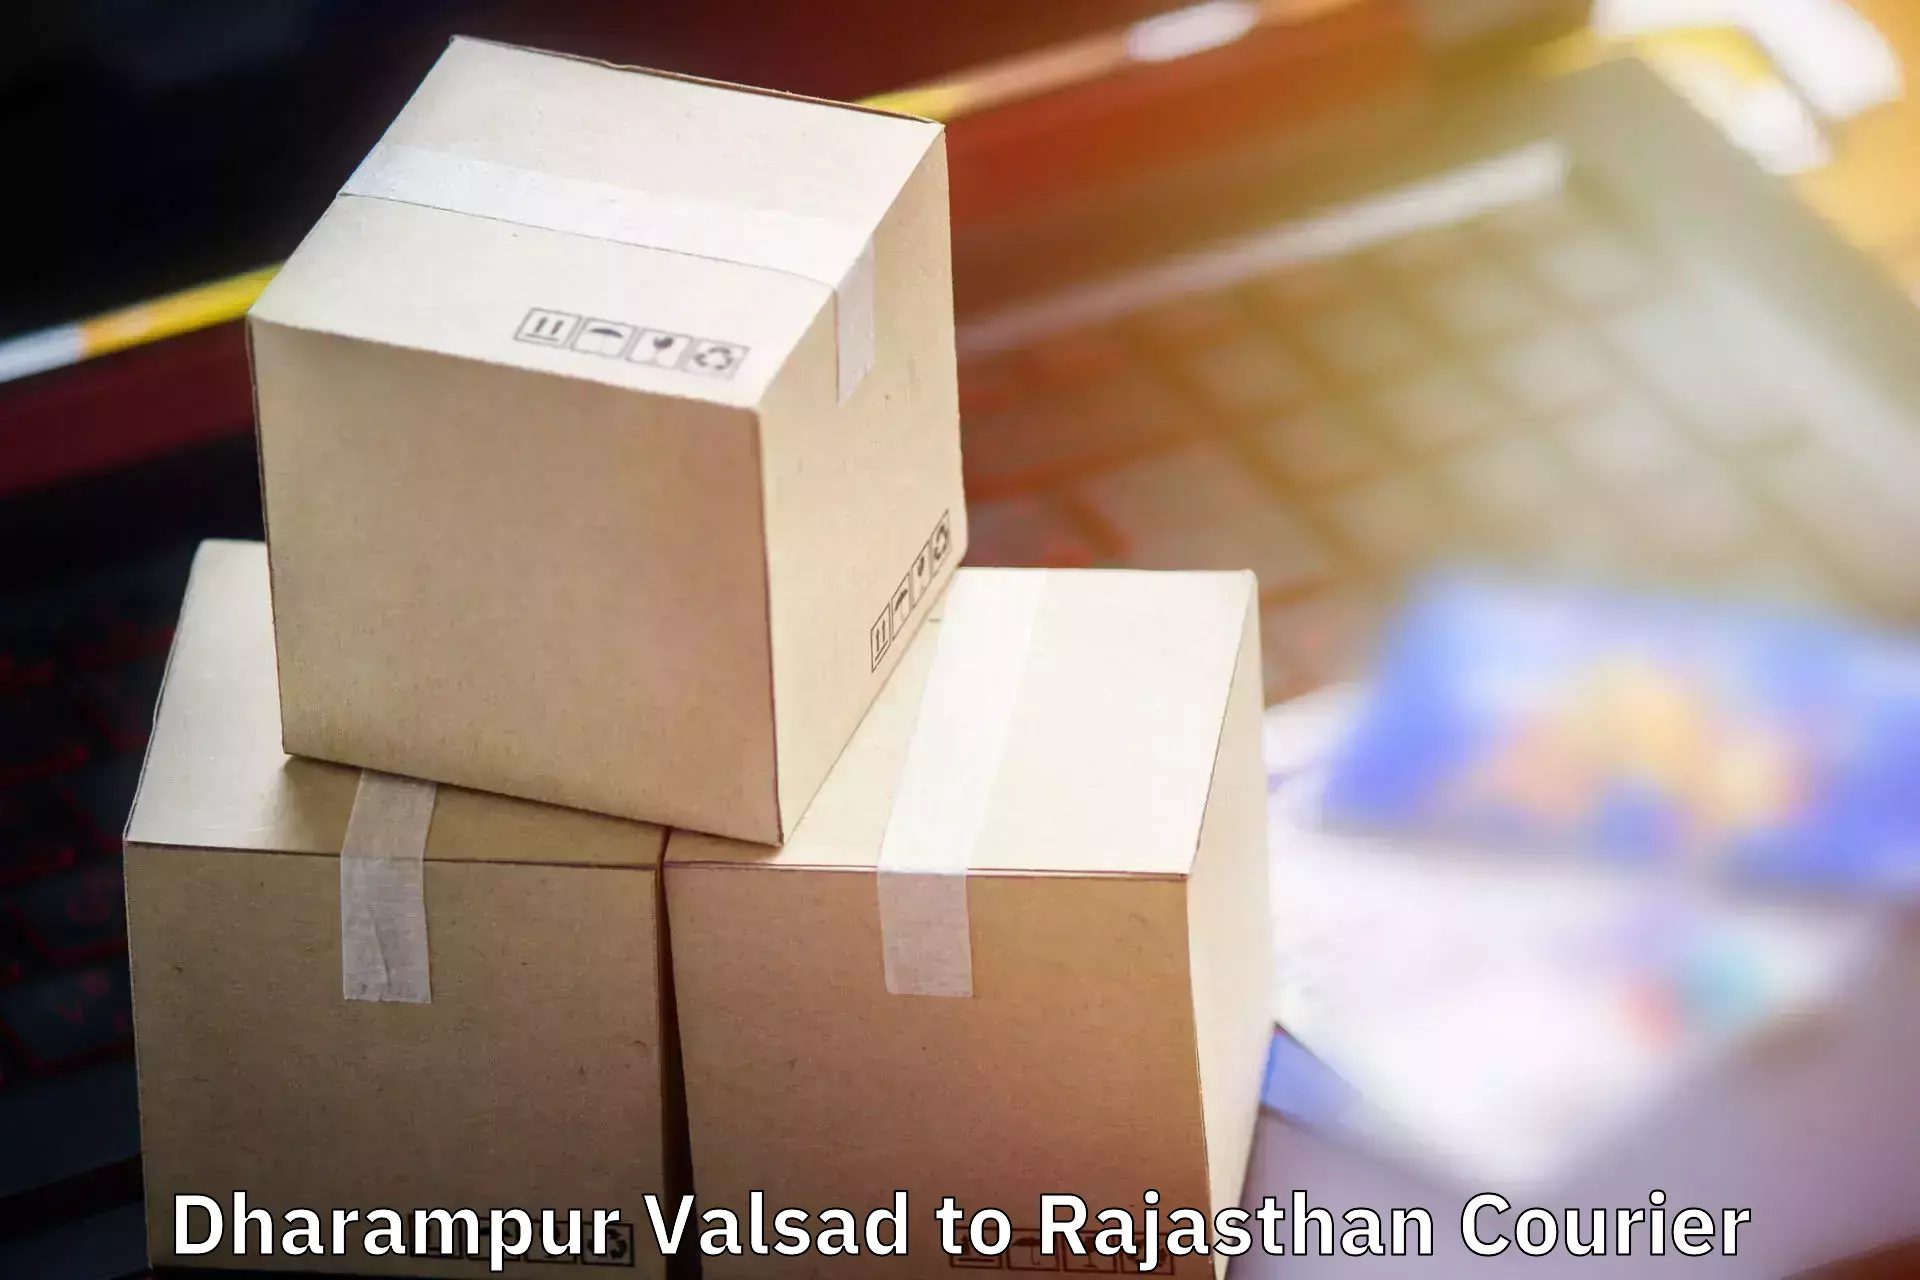 Baggage delivery technology Dharampur Valsad to Bharatpur